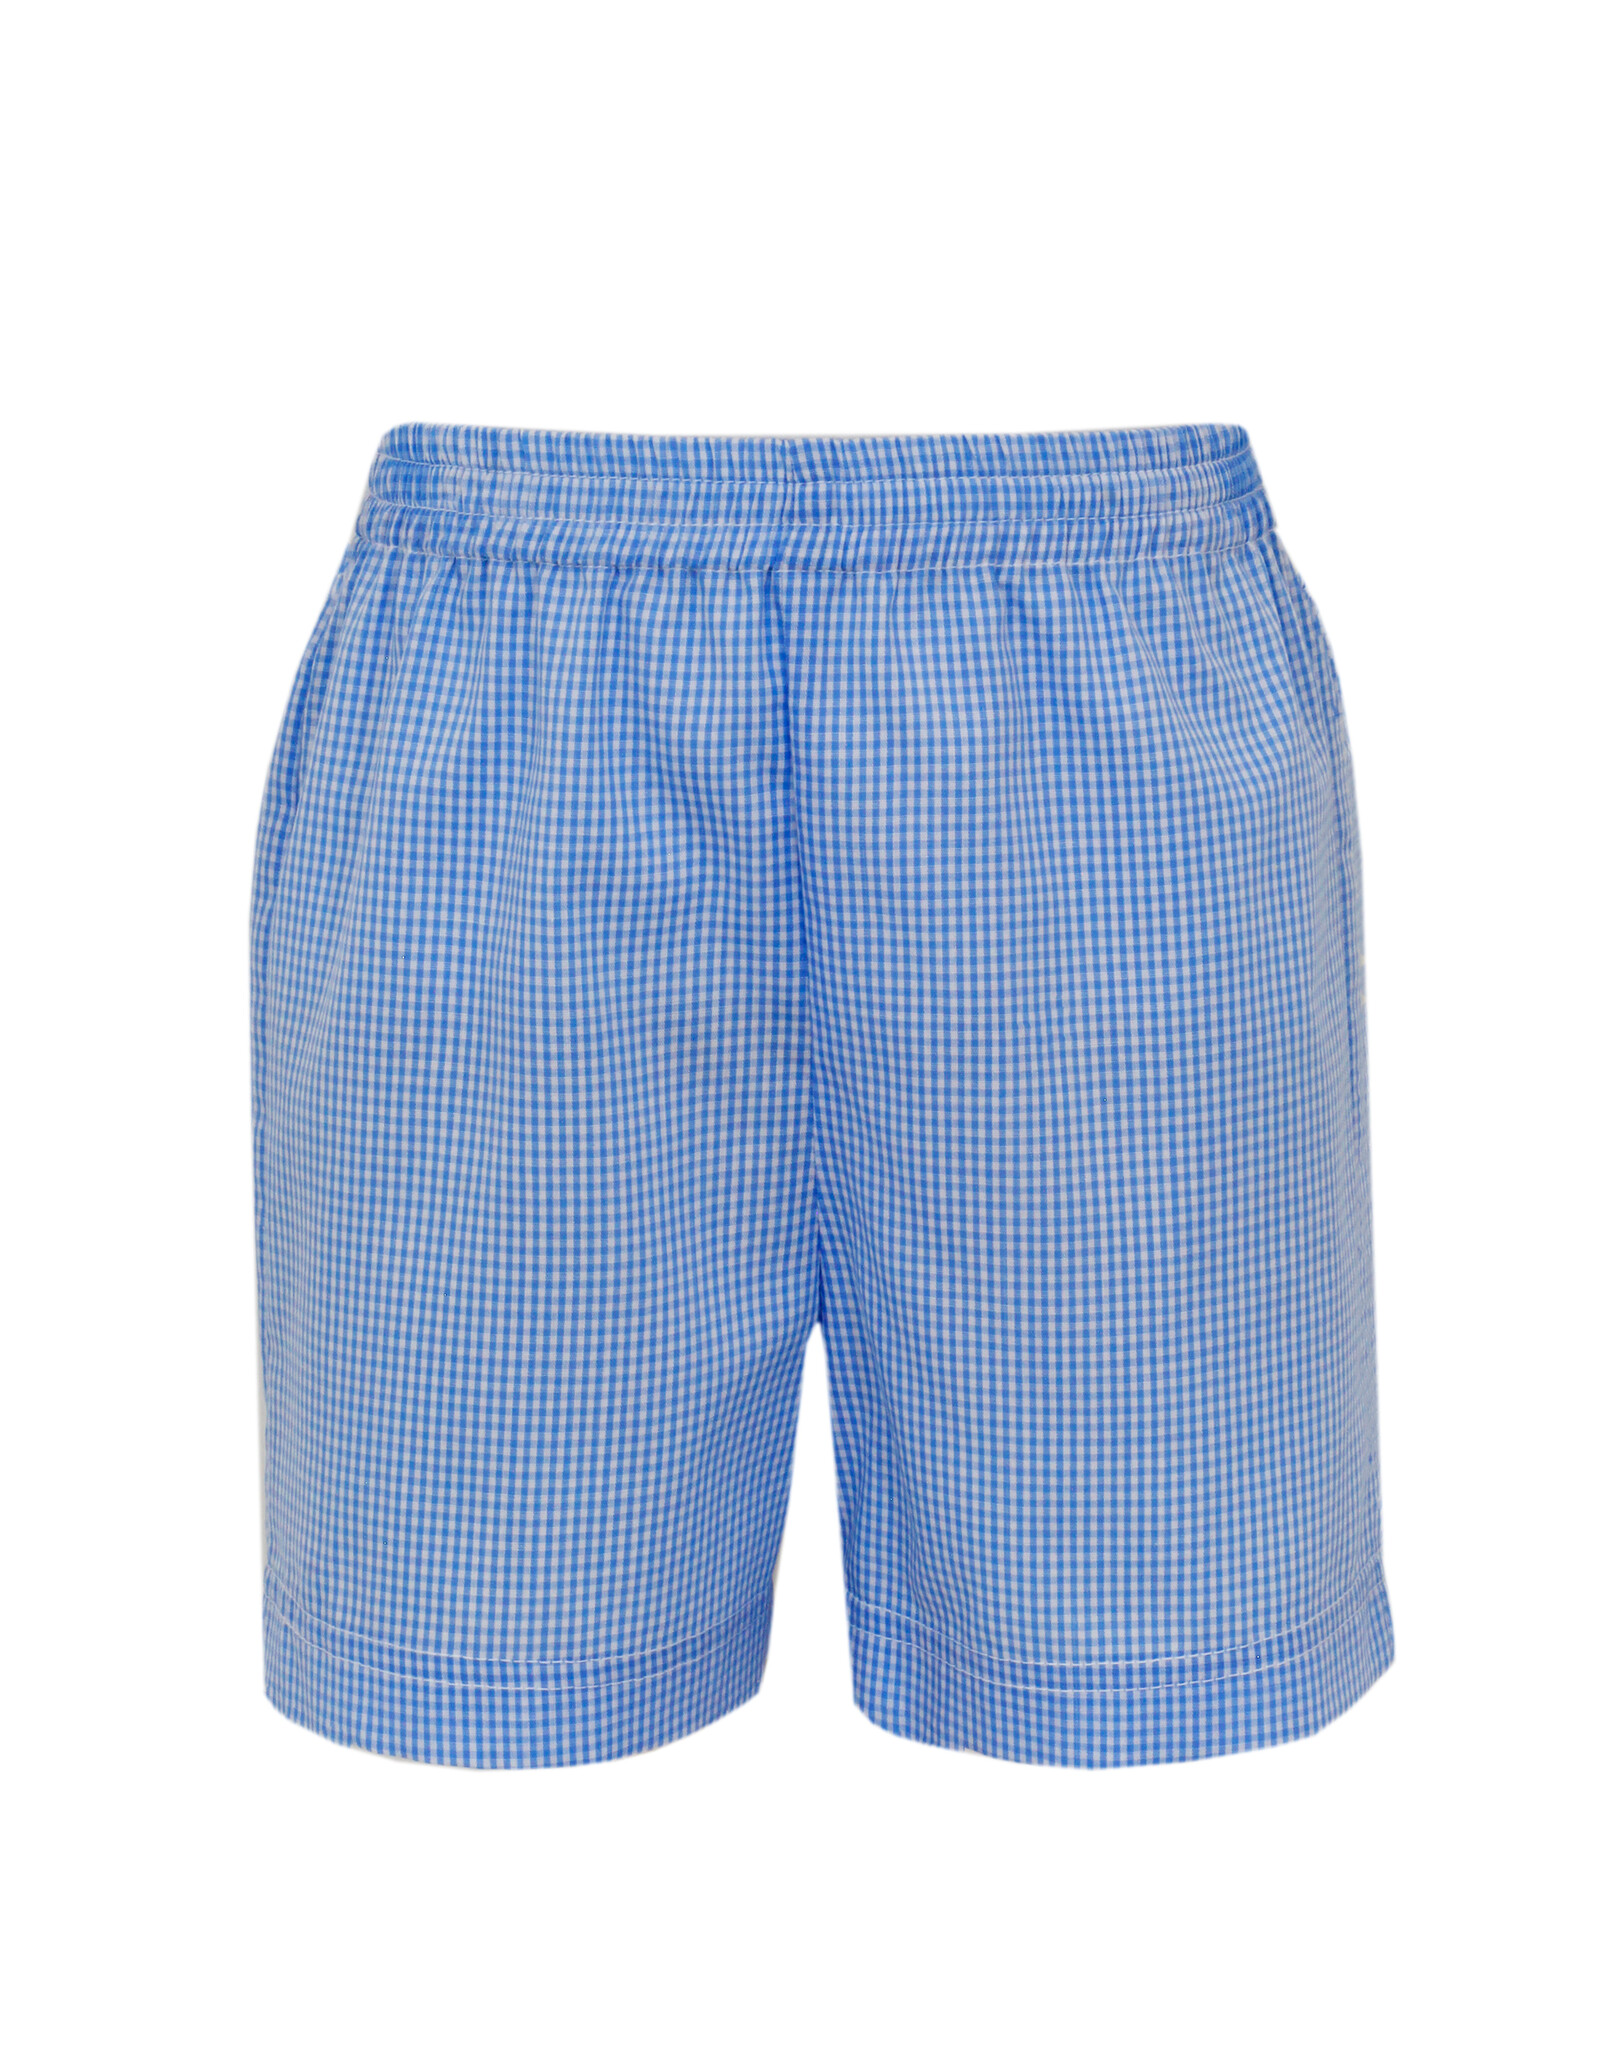 Claire and Charlie SHORT- Blue Gingham